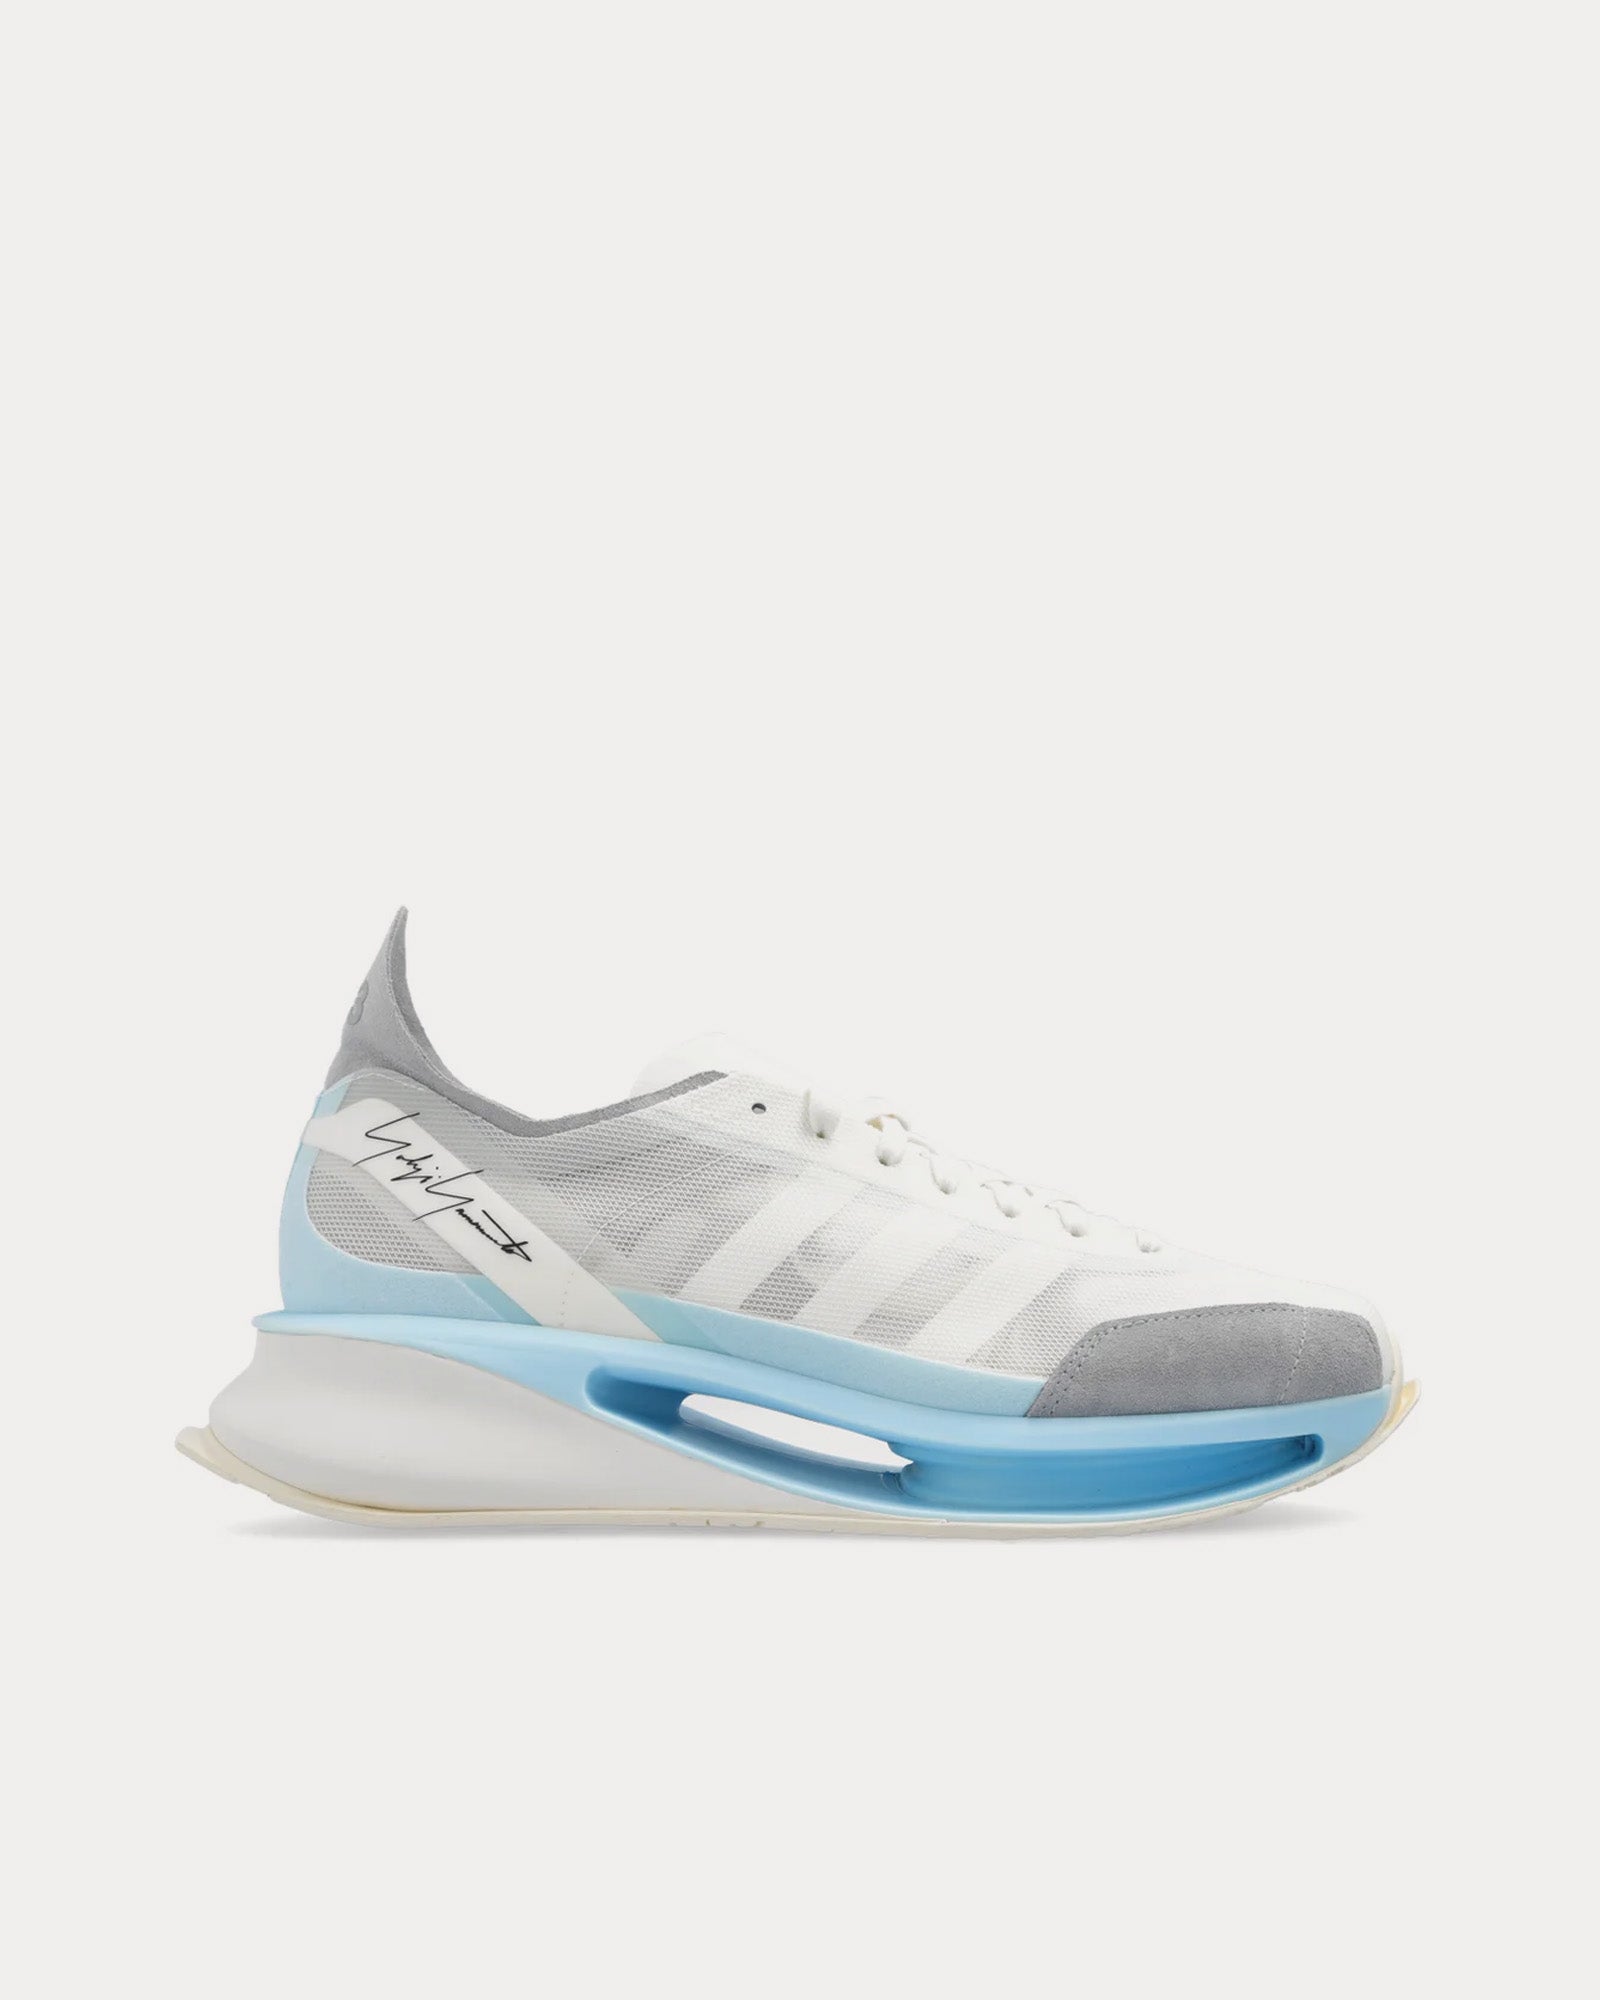 Y-3 - S-Gendo Run Off White / Grey / Light Blue Running Shoes